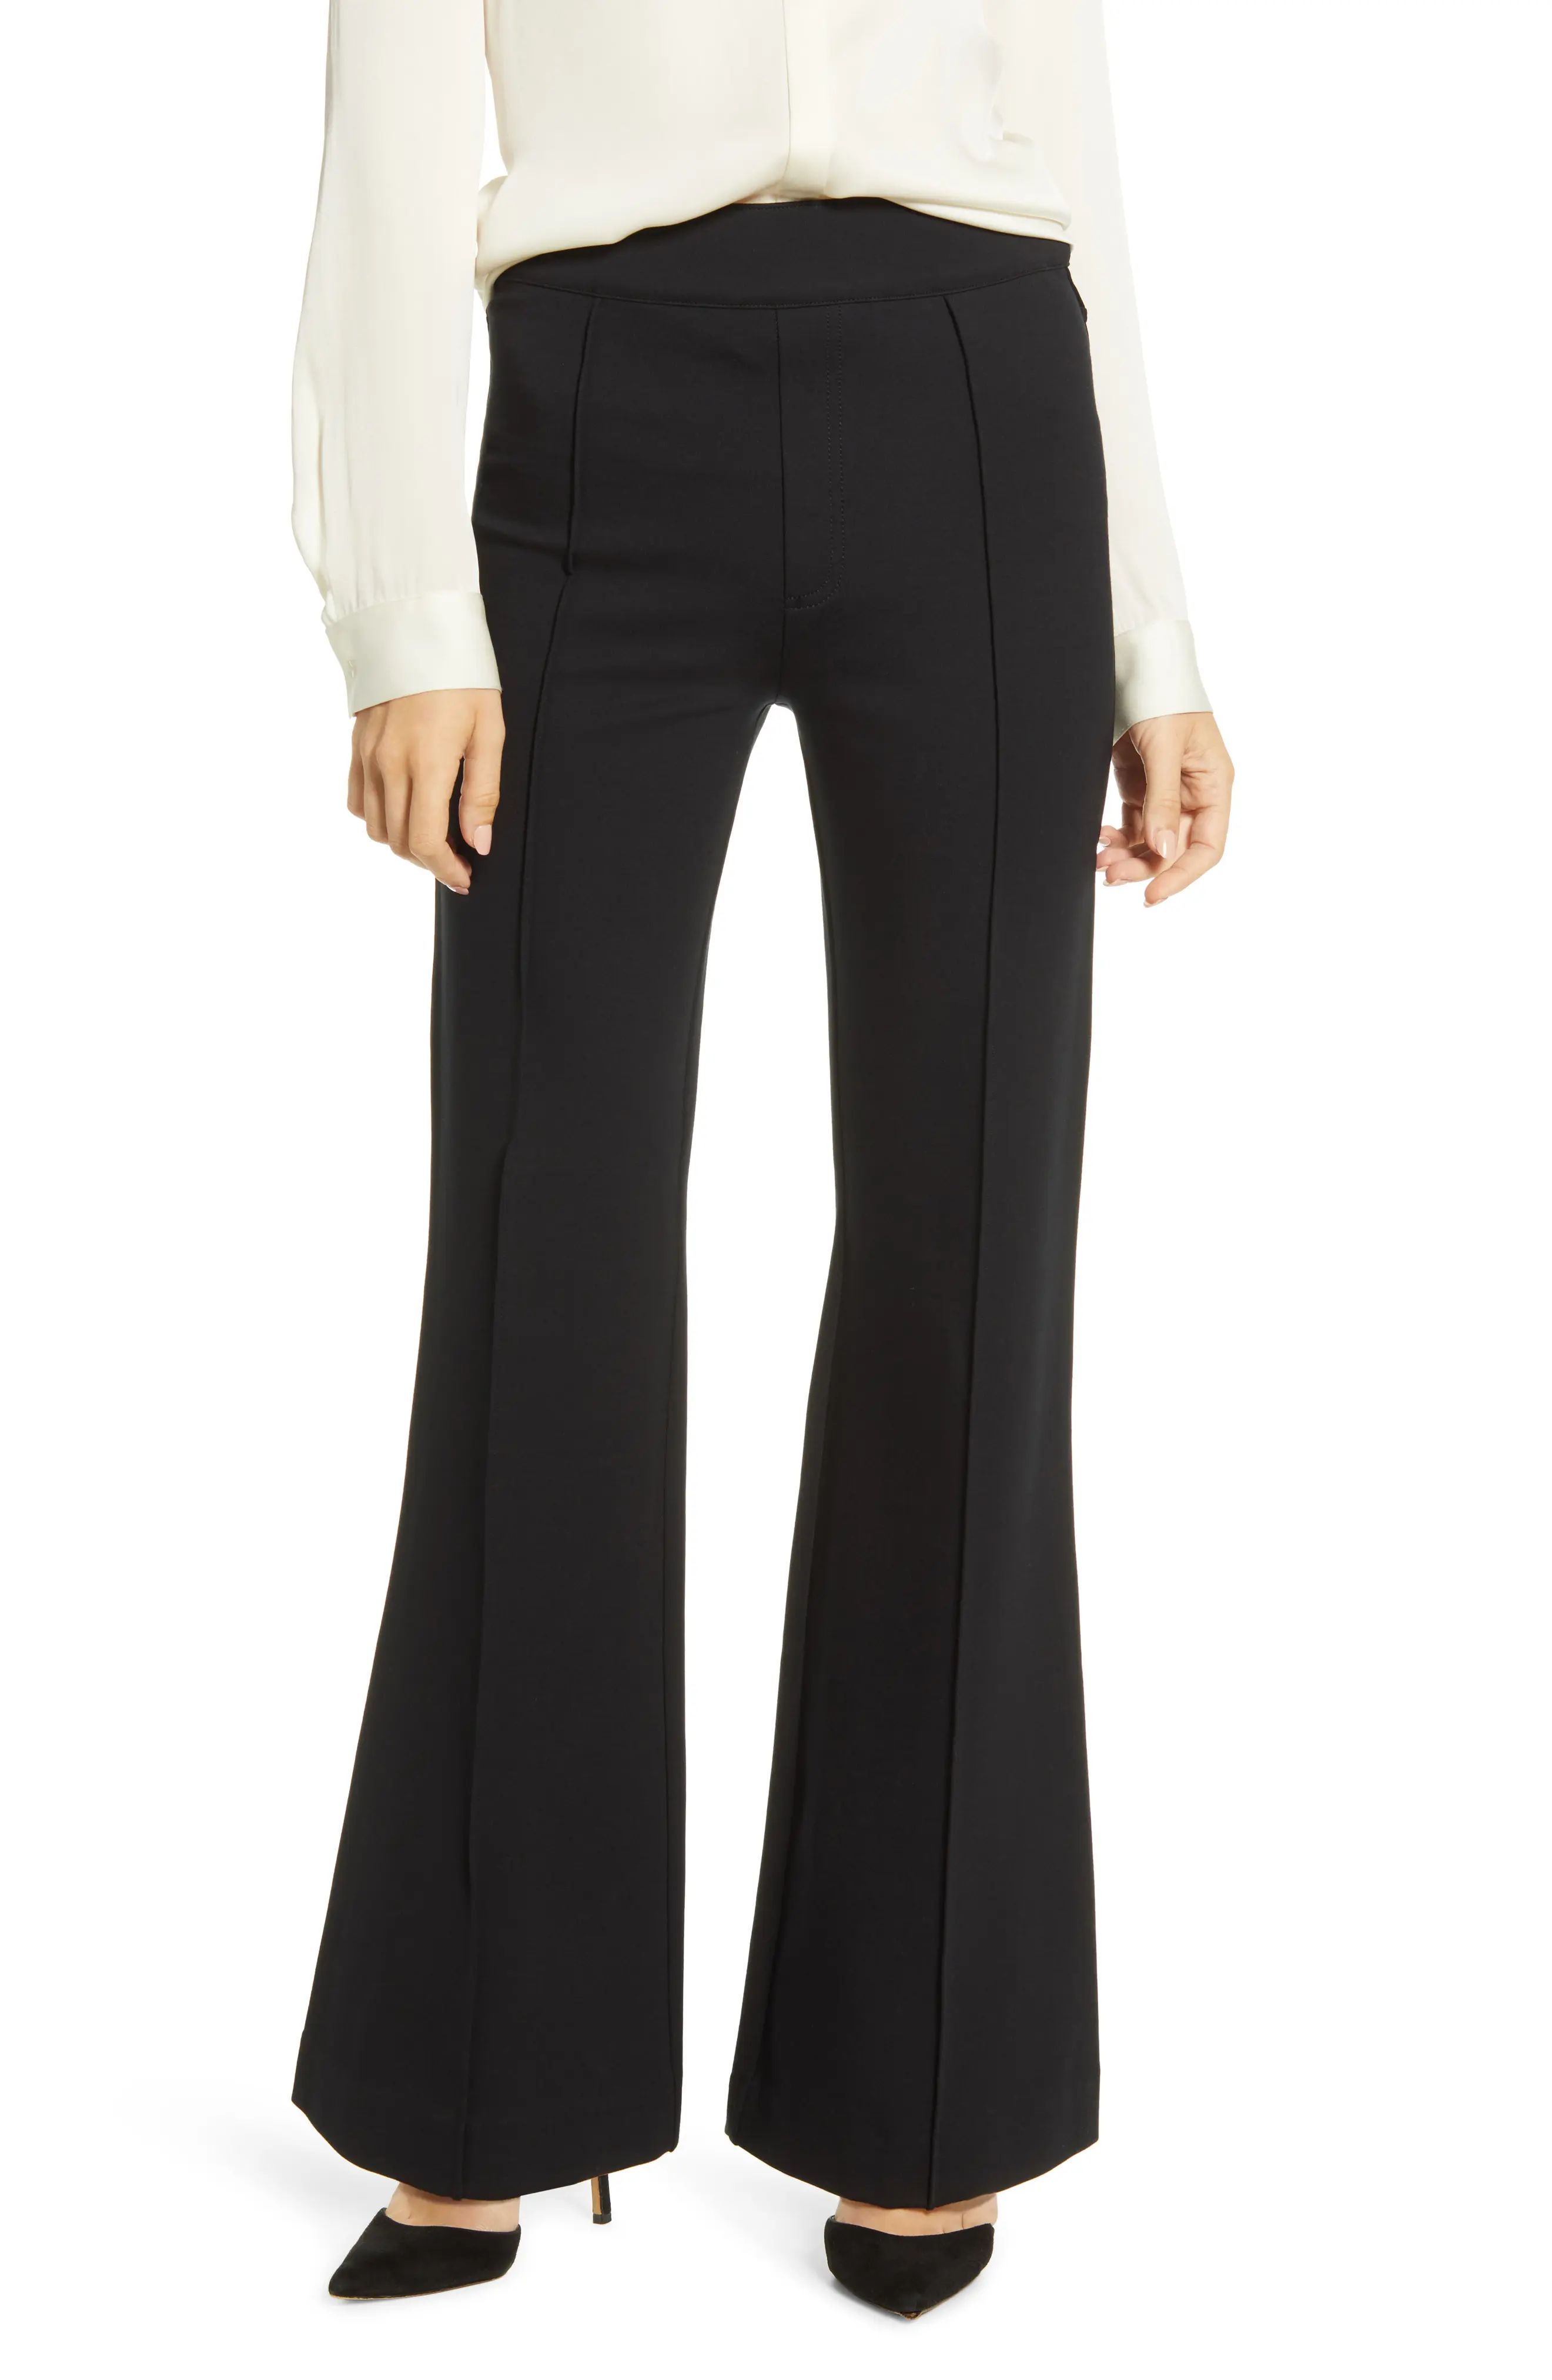 SPANX(R) The Perfect Black Pant High Waist Ponte Flare Pants, Size Medium in Classic Black at Nordst | Nordstrom